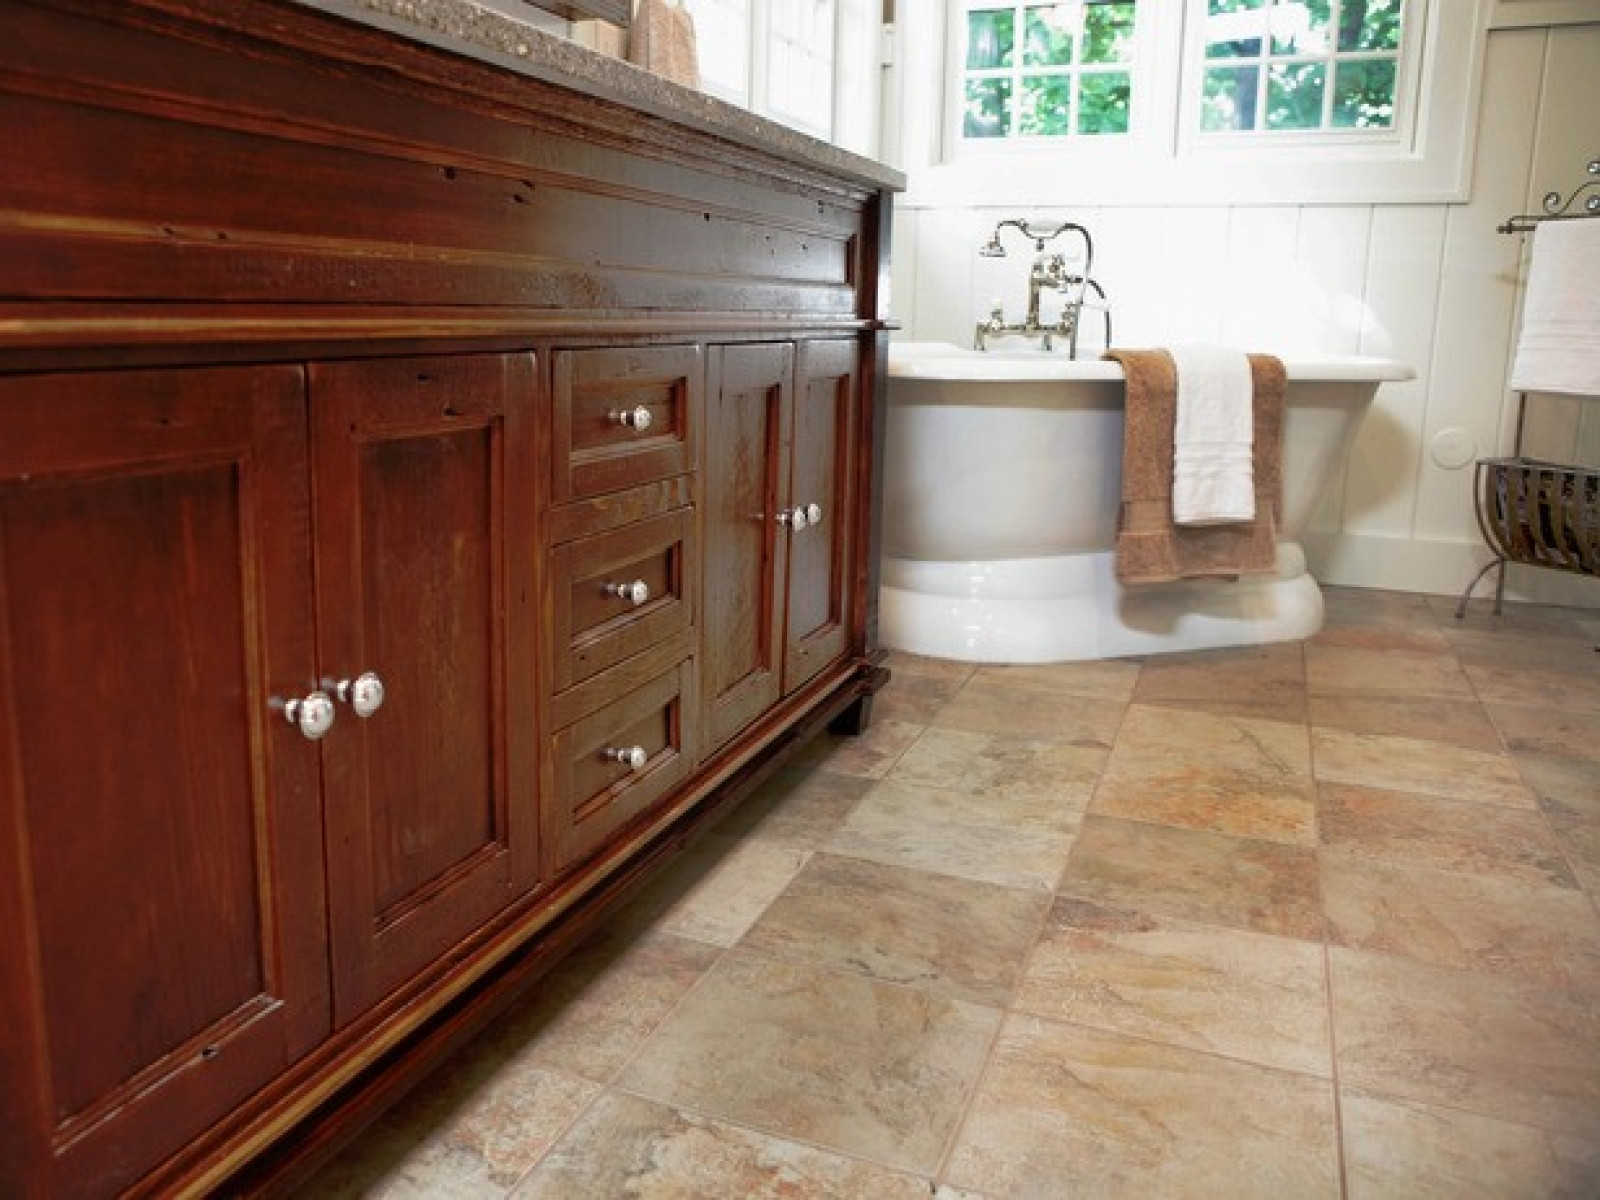 Stone Floor Tiles Bathroom
 30 cool ideas and pictures of natural stone bathroom